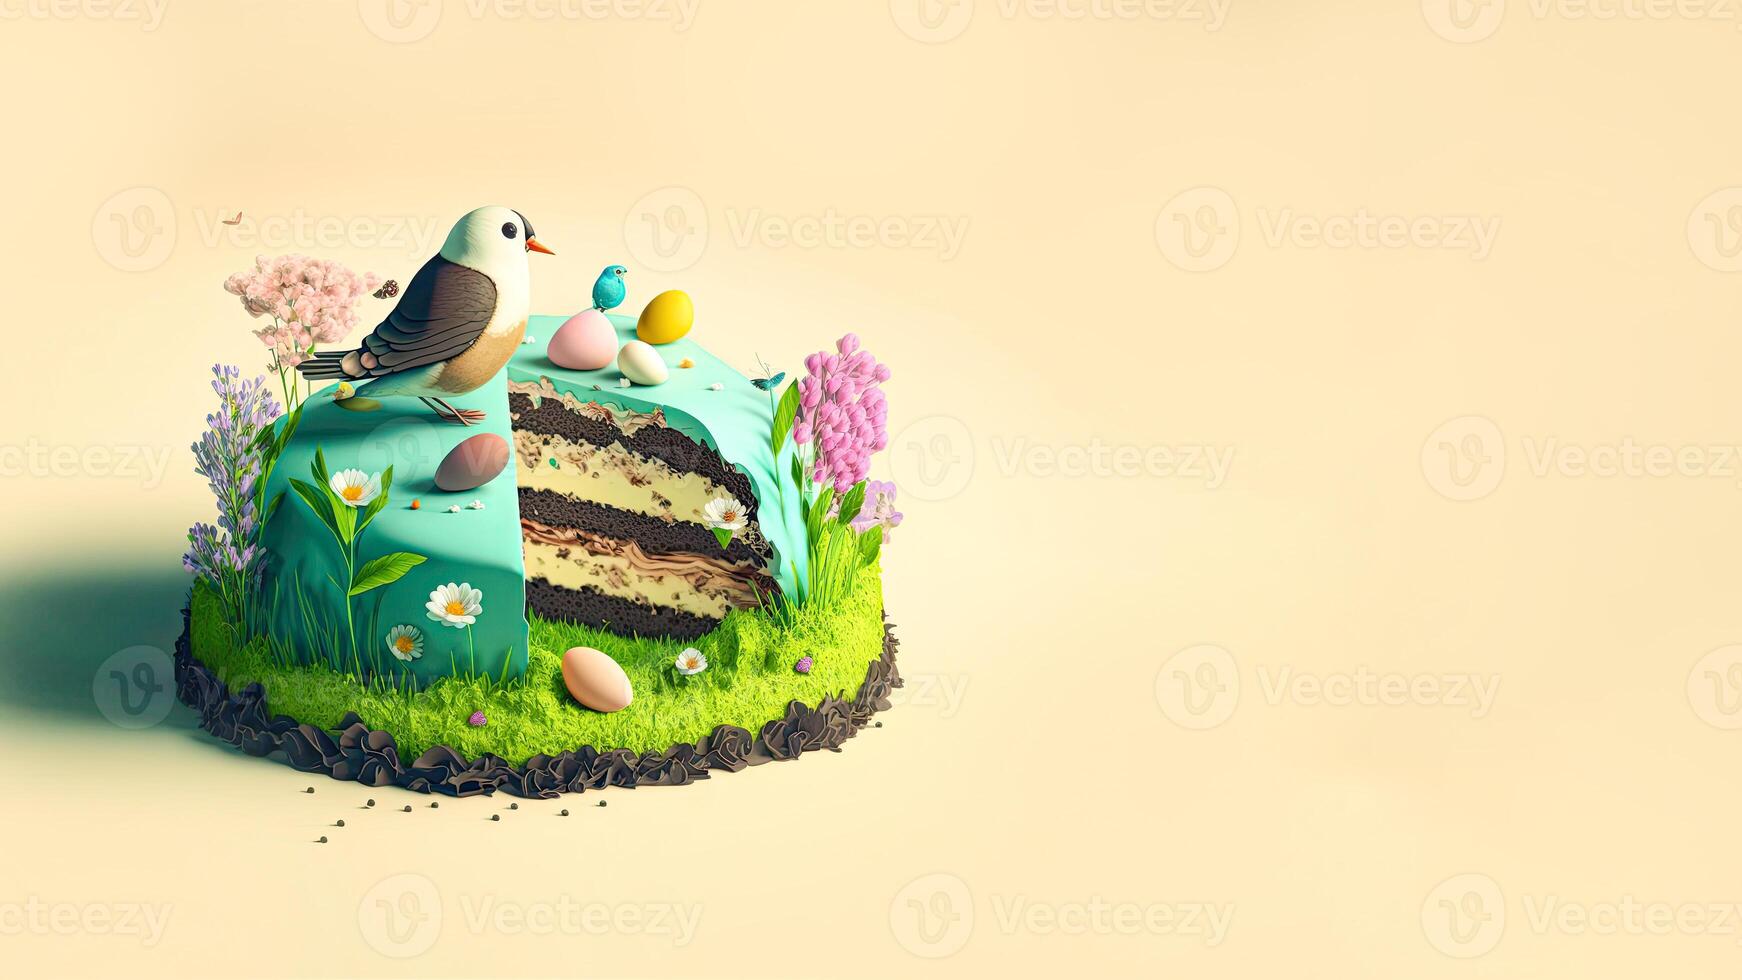 3D Render of Nature Cake Decorative With Cute Bird Character, Eggs And Flowers. photo